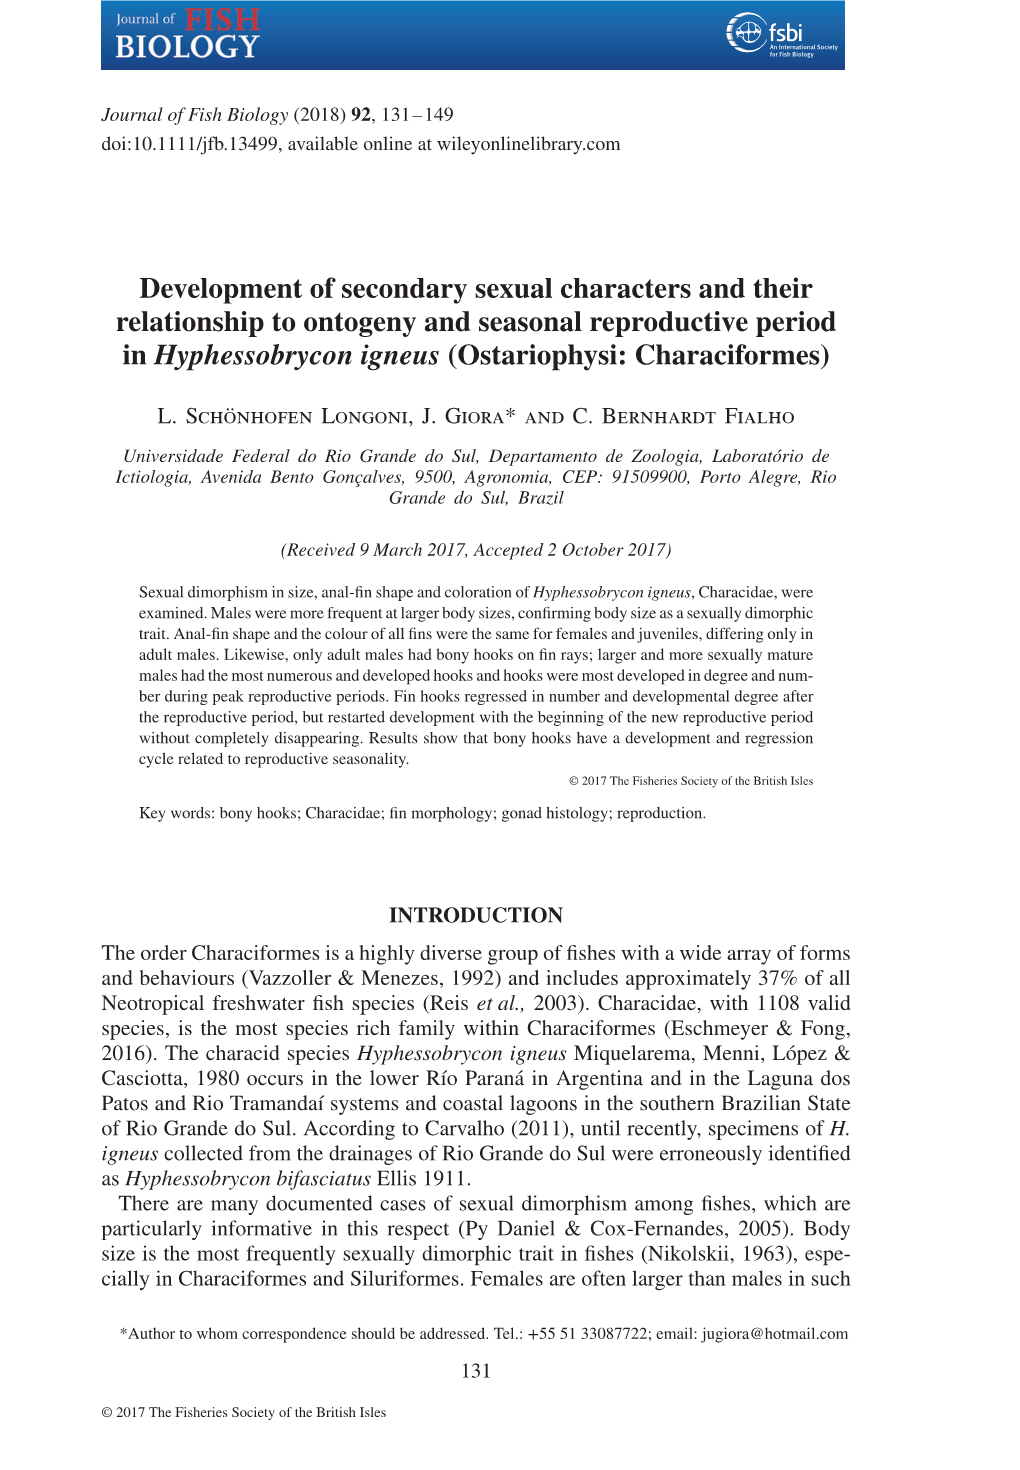 Development of Secondary Sexual Characters and Their Relationship to Ontogeny and Seasonal Reproductive Period in Hyphessobrycon Igneus (Ostariophysi: Characiformes)